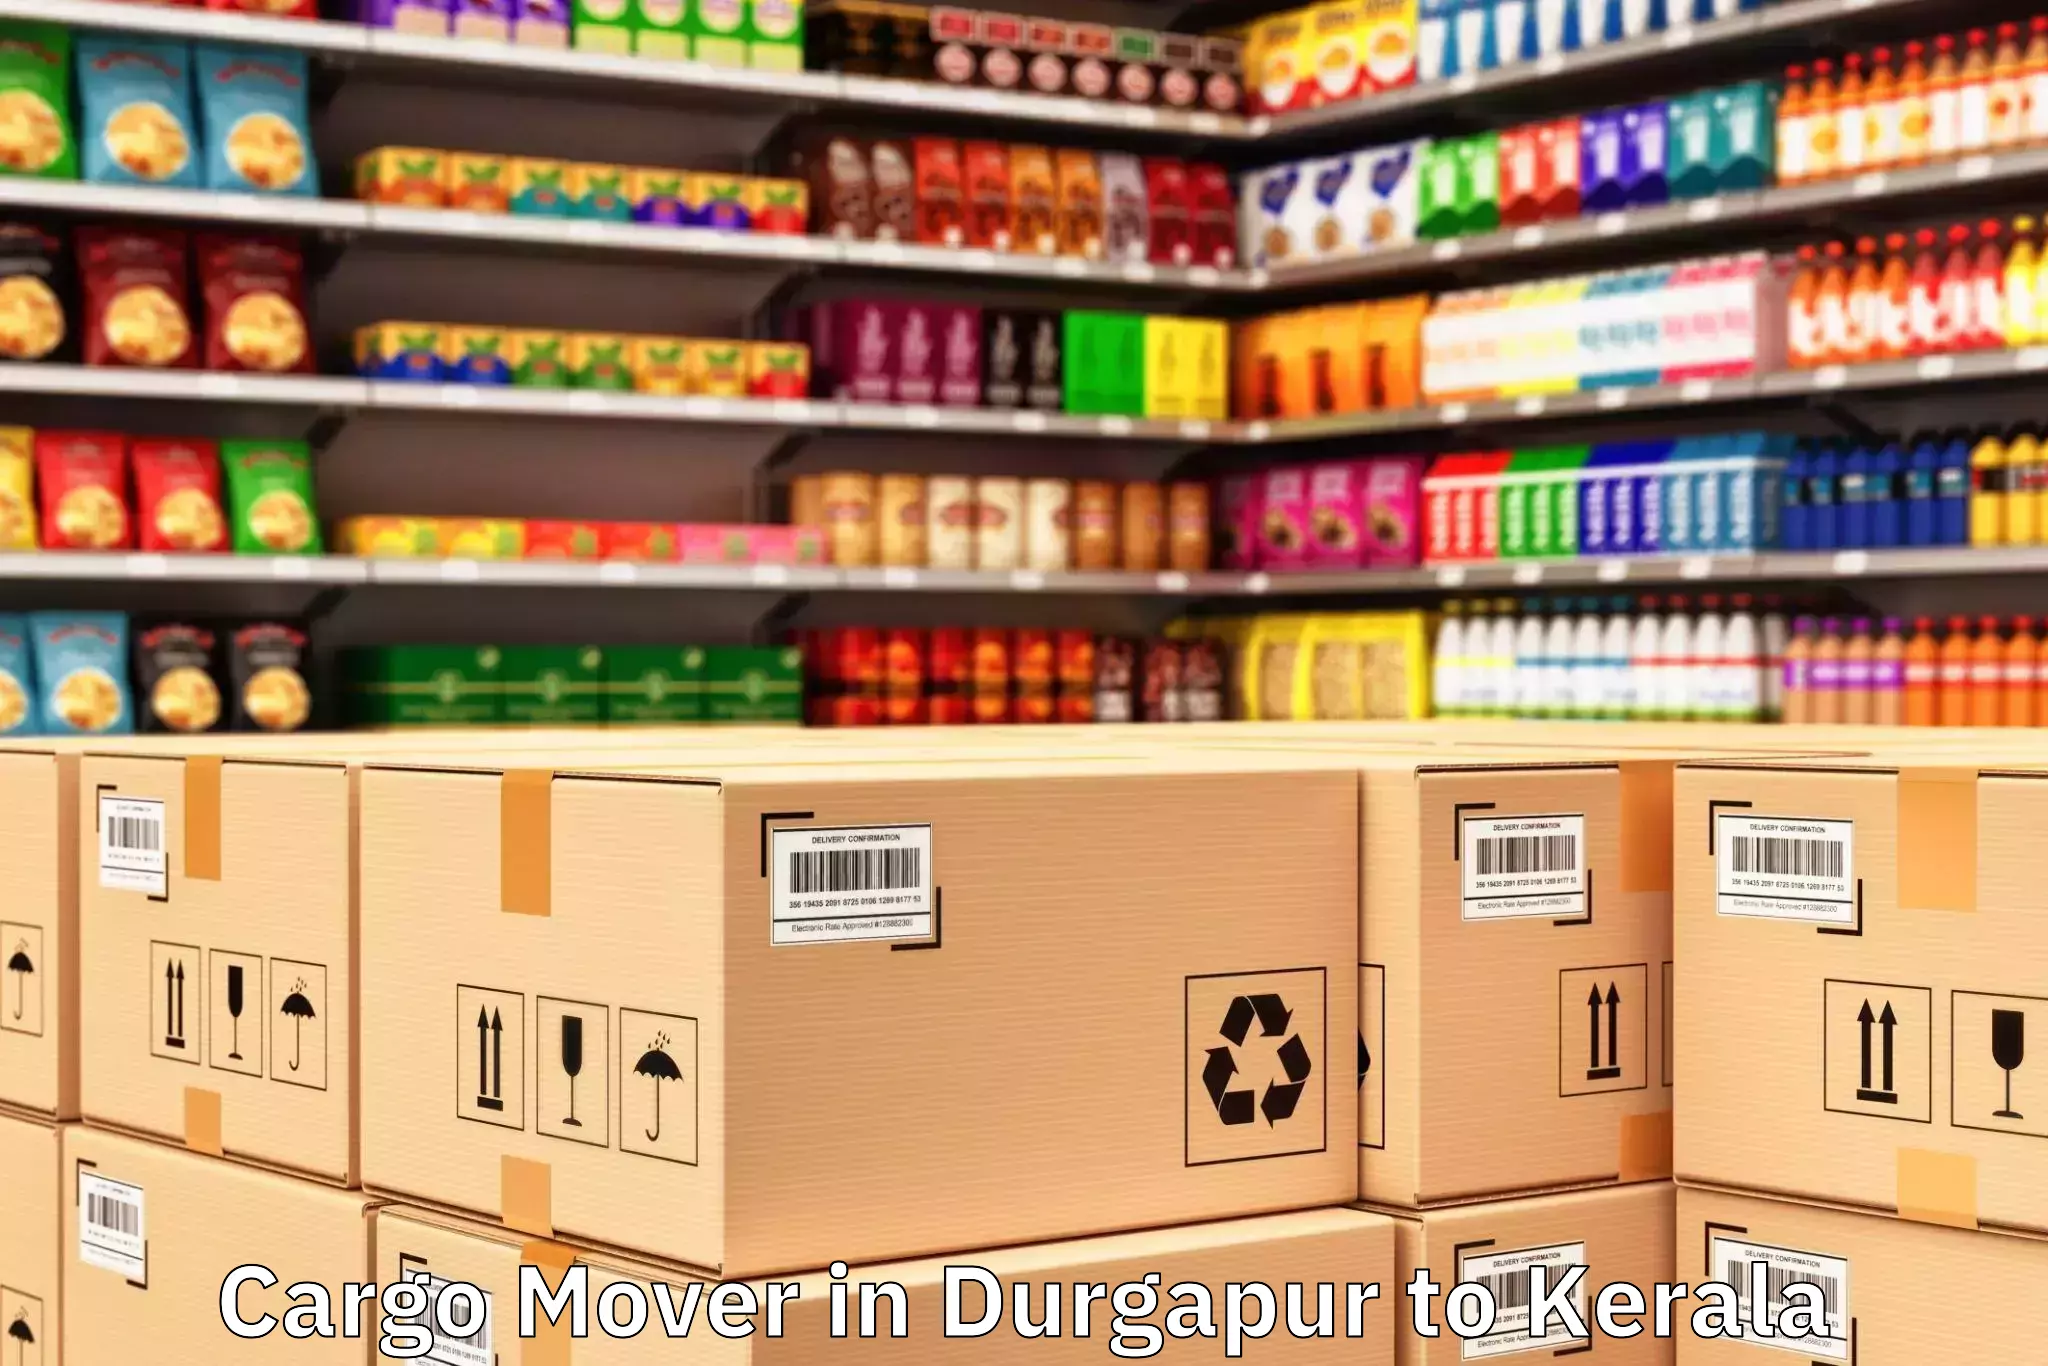 Quality Durgapur to Kuttanad Cargo Mover